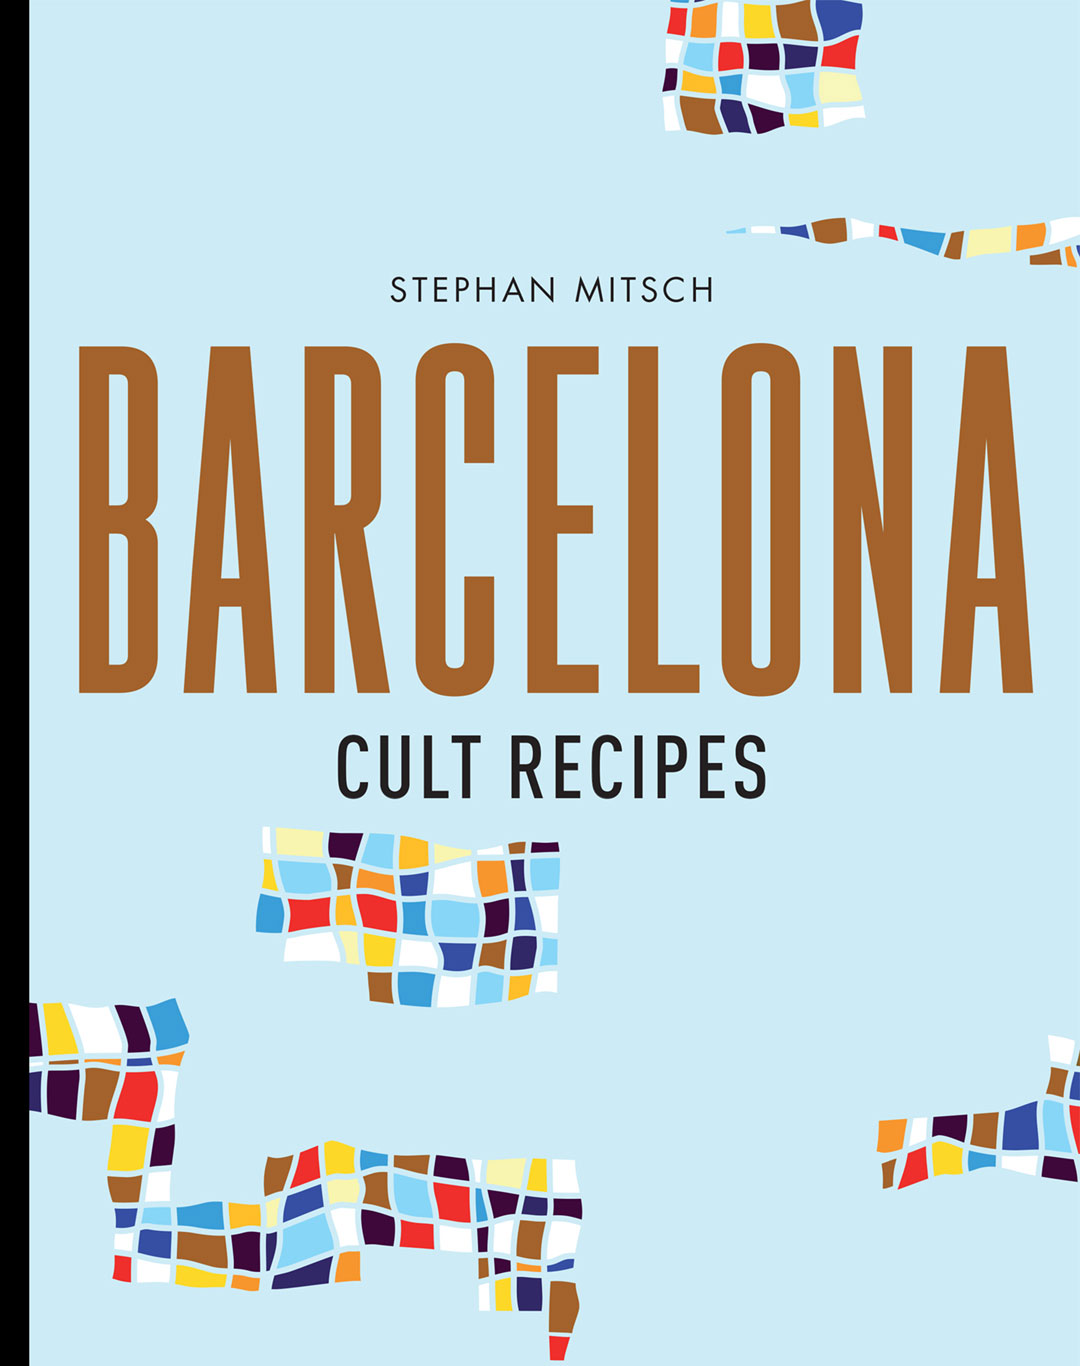 Barcelona Cult Recipes by Stephen Mitsch